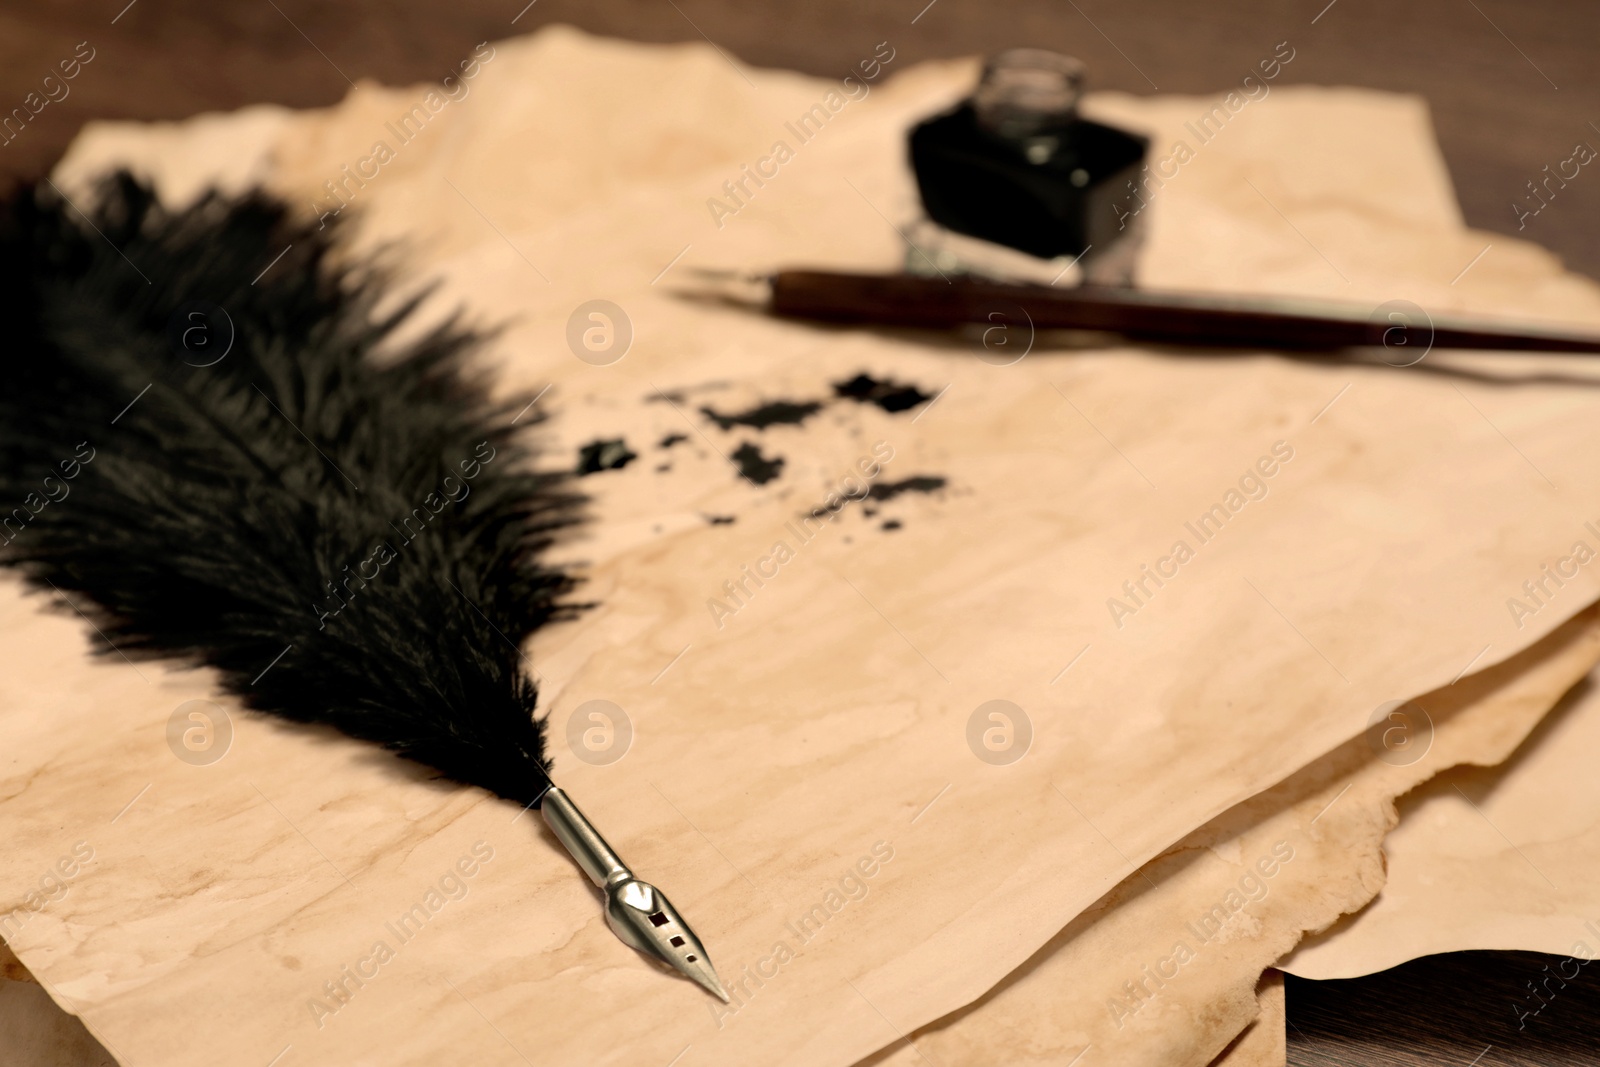 Photo of Different pens, inkwell and vintage parchment with ink stains on table, closeup